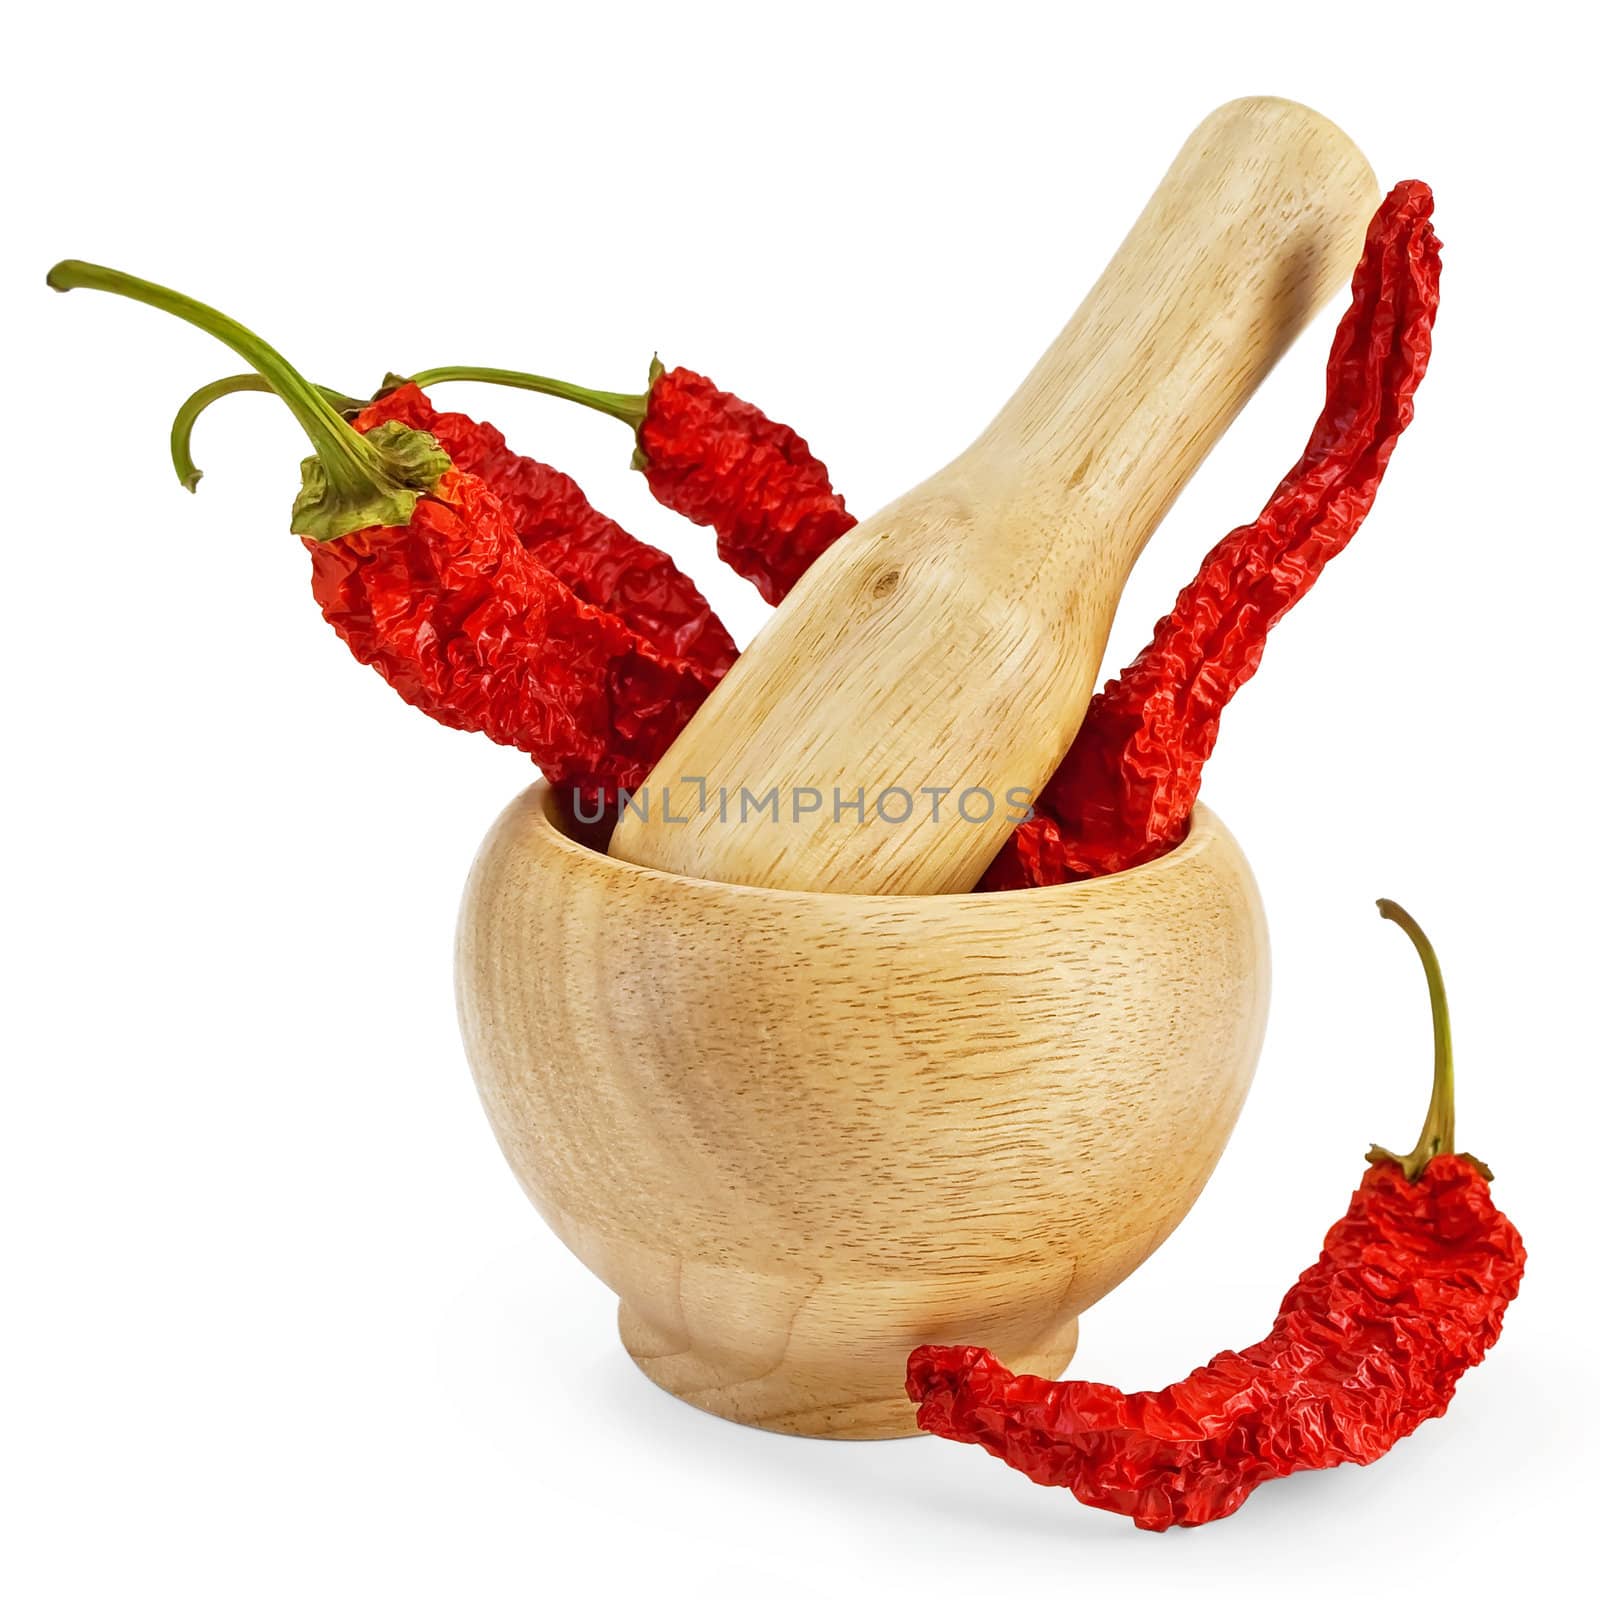 Three dry hot peppers in a wooden bowl and a pepper on the table isolated on white background